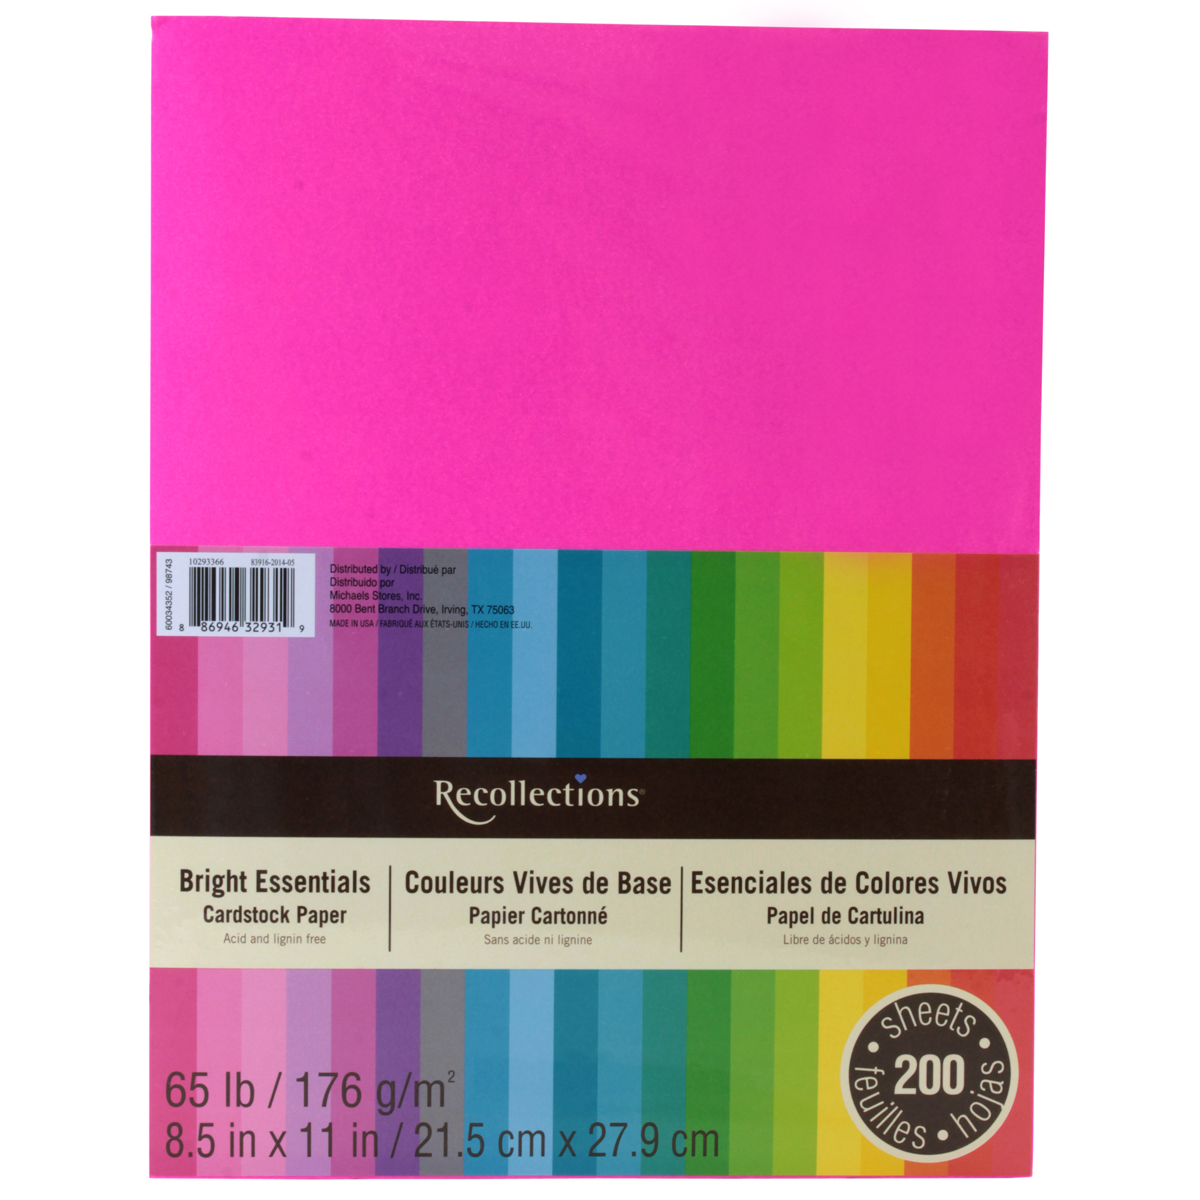 Bright Essentials 8.5 x 11 Cardstock Paper by Recollections®, 200 Sheets